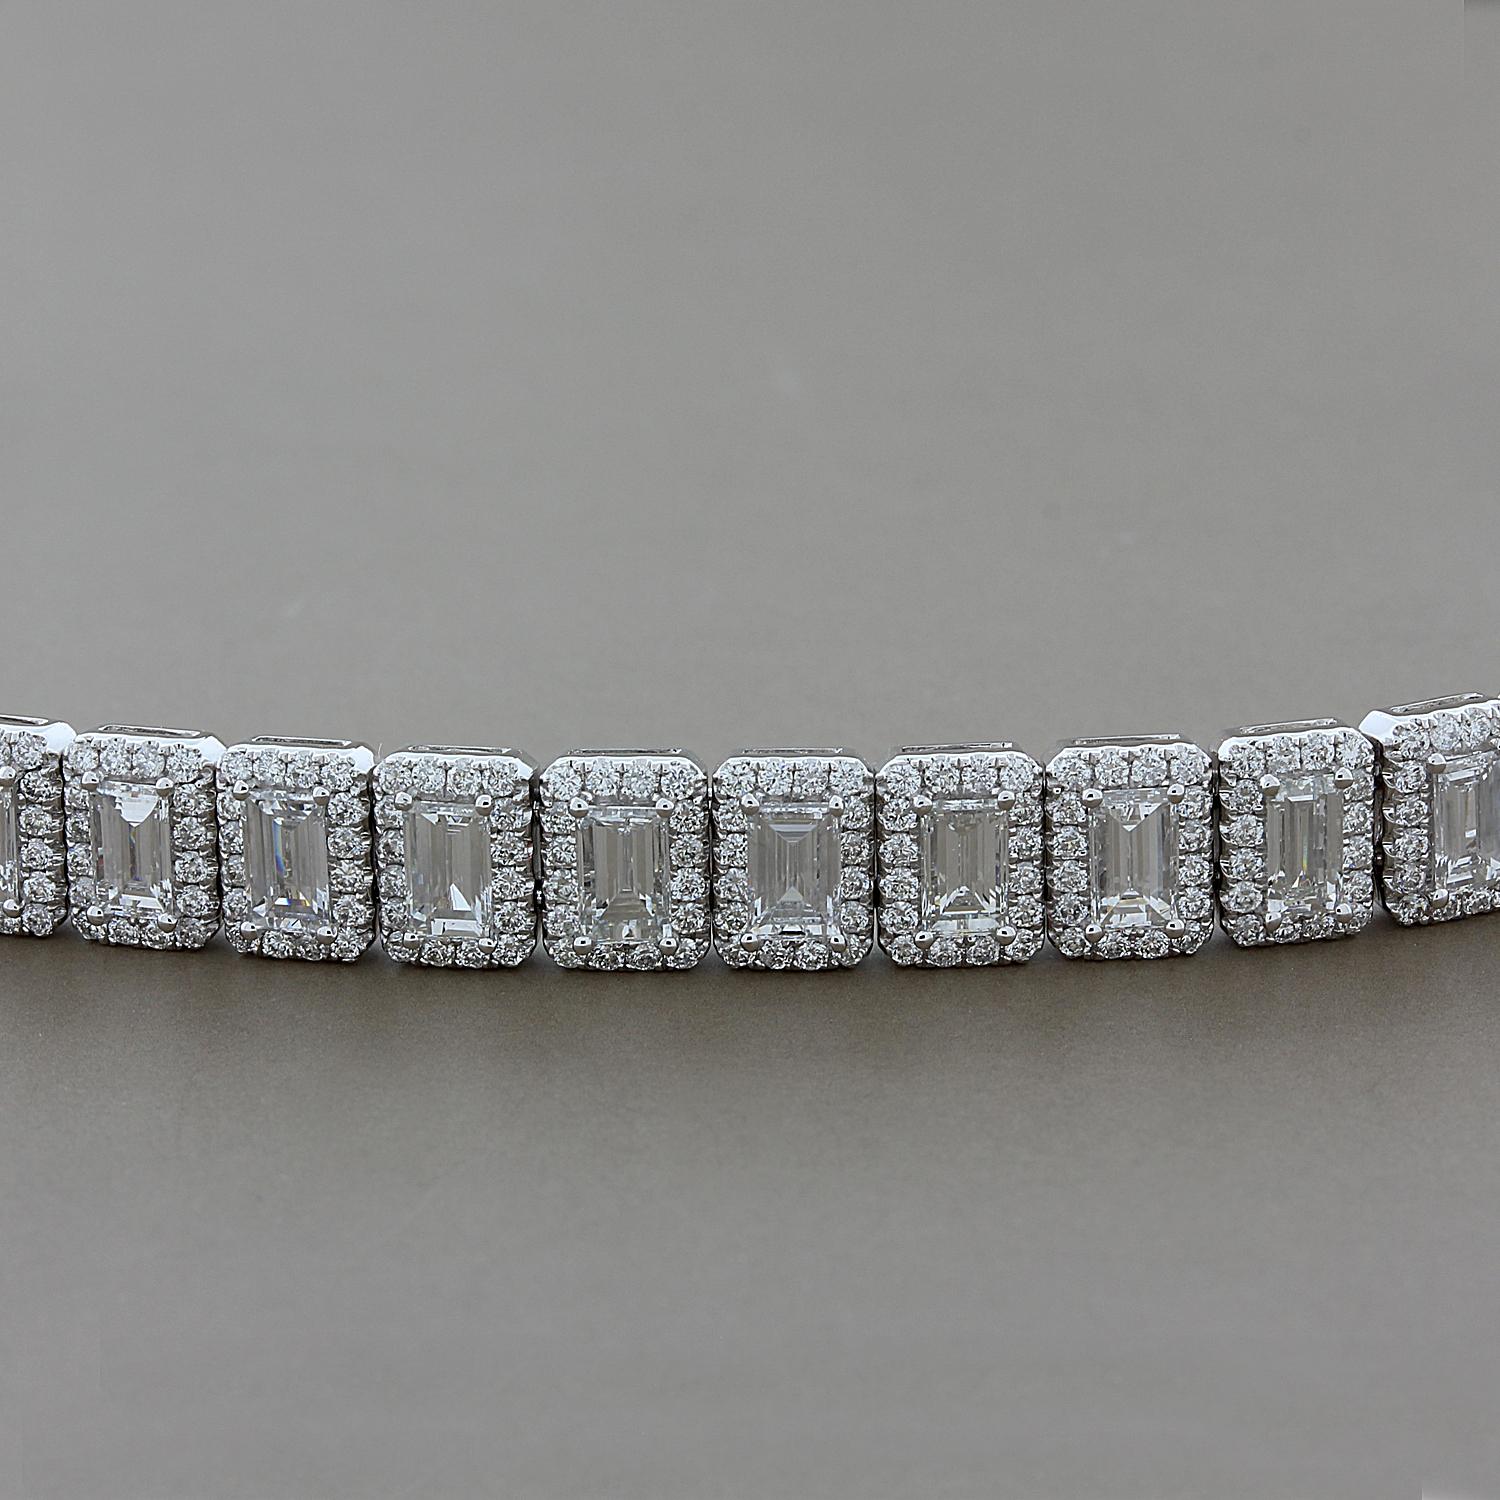 This stunning bracelet features 17.54 carats of emerald cut diamonds haloed by 7.15 carats of round cut diamonds. Set in 18K white gold with a box clasp closure and two safety latches.  All diamonds are colorless VS quality.

Fits wrists up to 7